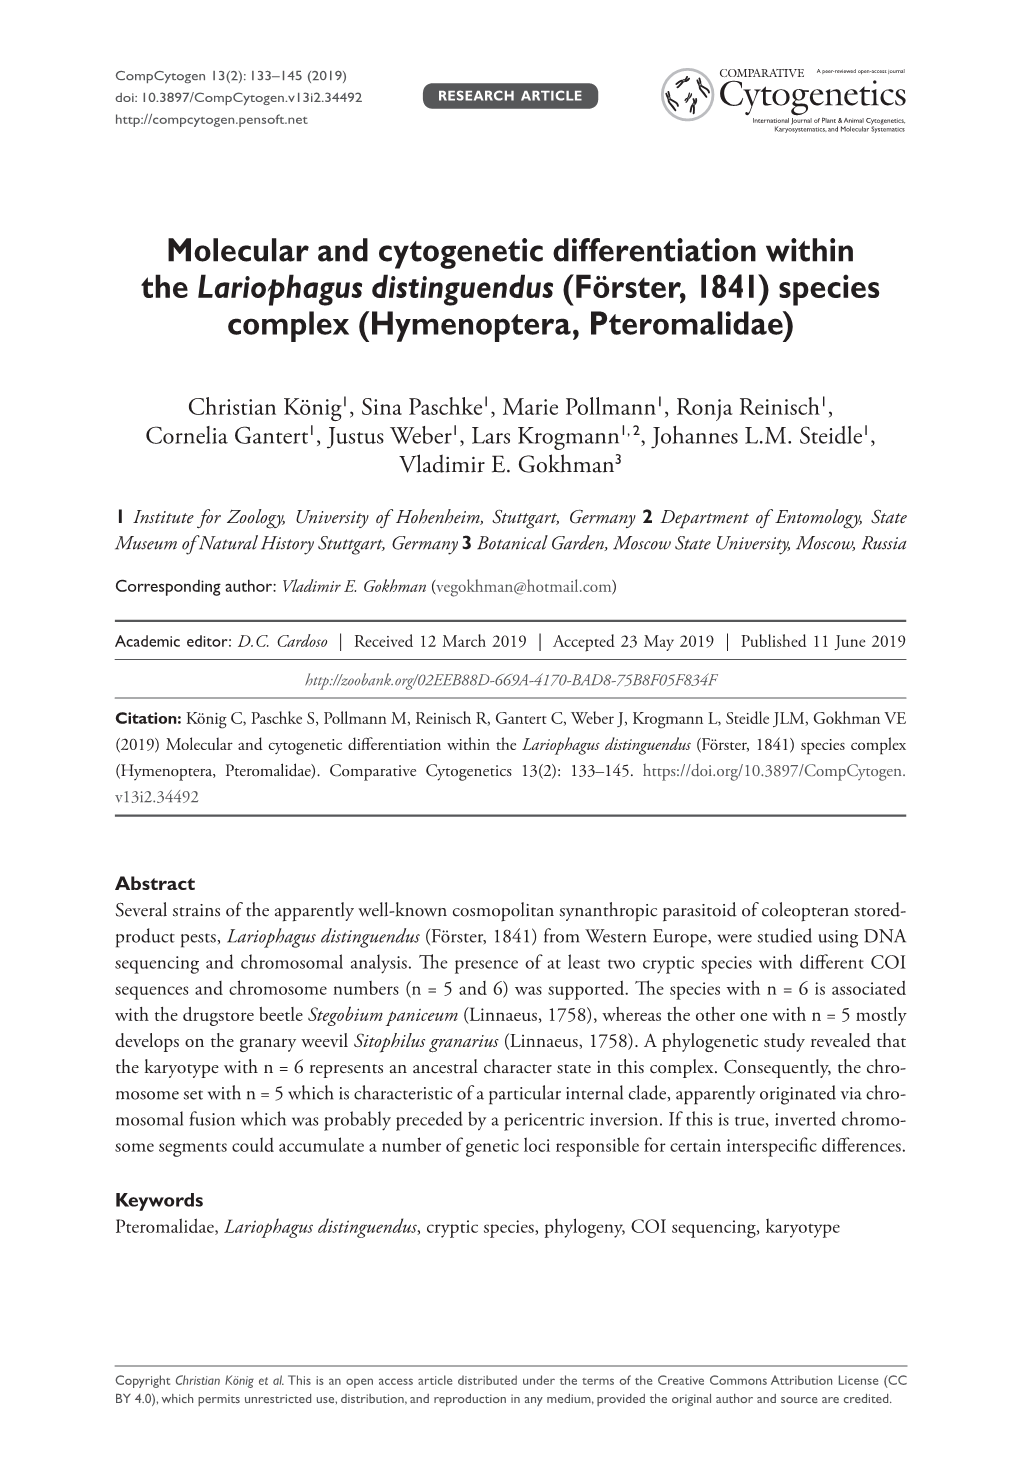 Molecular and Cytogenetic Differentiation Within the Lariophagus Distinguendus (Förster, 1841) Species Complex (Hymenoptera, Pteromalidae)